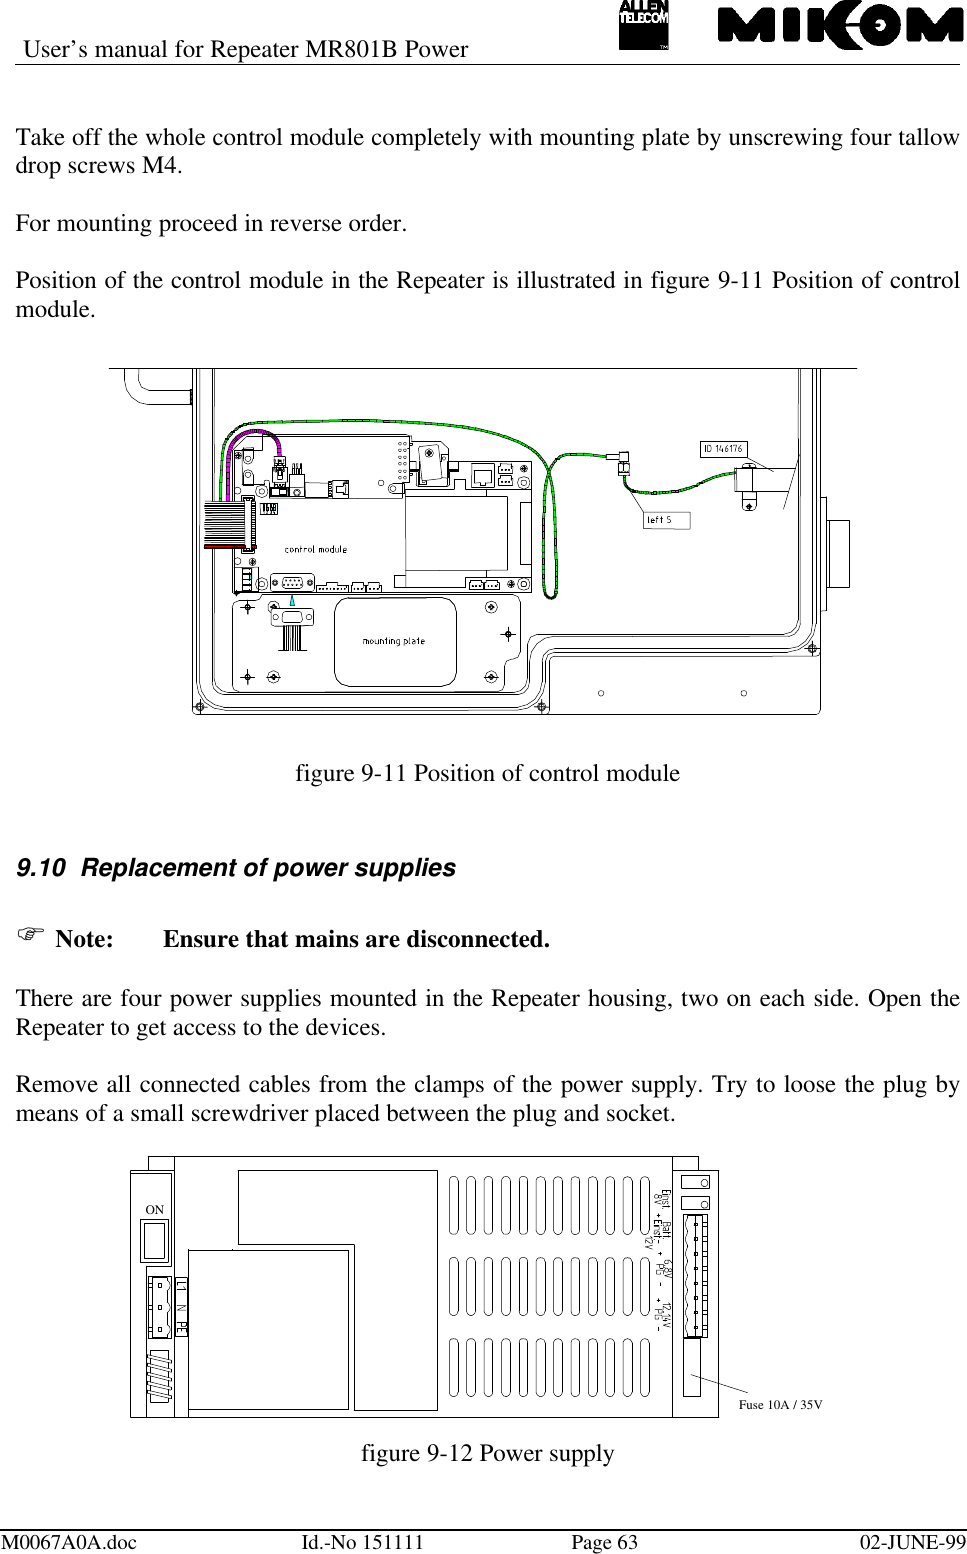 User’s manual for Repeater MR801B PowerM0067A0A.doc Id.-No 151111 Page 63 02-JUNE-99Take off the whole control module completely with mounting plate by unscrewing four tallowdrop screws M4.For mounting proceed in reverse order.Position of the control module in the Repeater is illustrated in figure 9-11 Position of controlmodule.figure 9-11 Position of control module9.10 Replacement of power suppliesF Note: Ensure that mains are disconnected.There are four power supplies mounted in the Repeater housing, two on each side. Open theRepeater to get access to the devices.Remove all connected cables from the clamps of the power supply. Try to loose the plug bymeans of a small screwdriver placed between the plug and socket.ONFuse 10A / 35Vfigure 9-12 Power supply